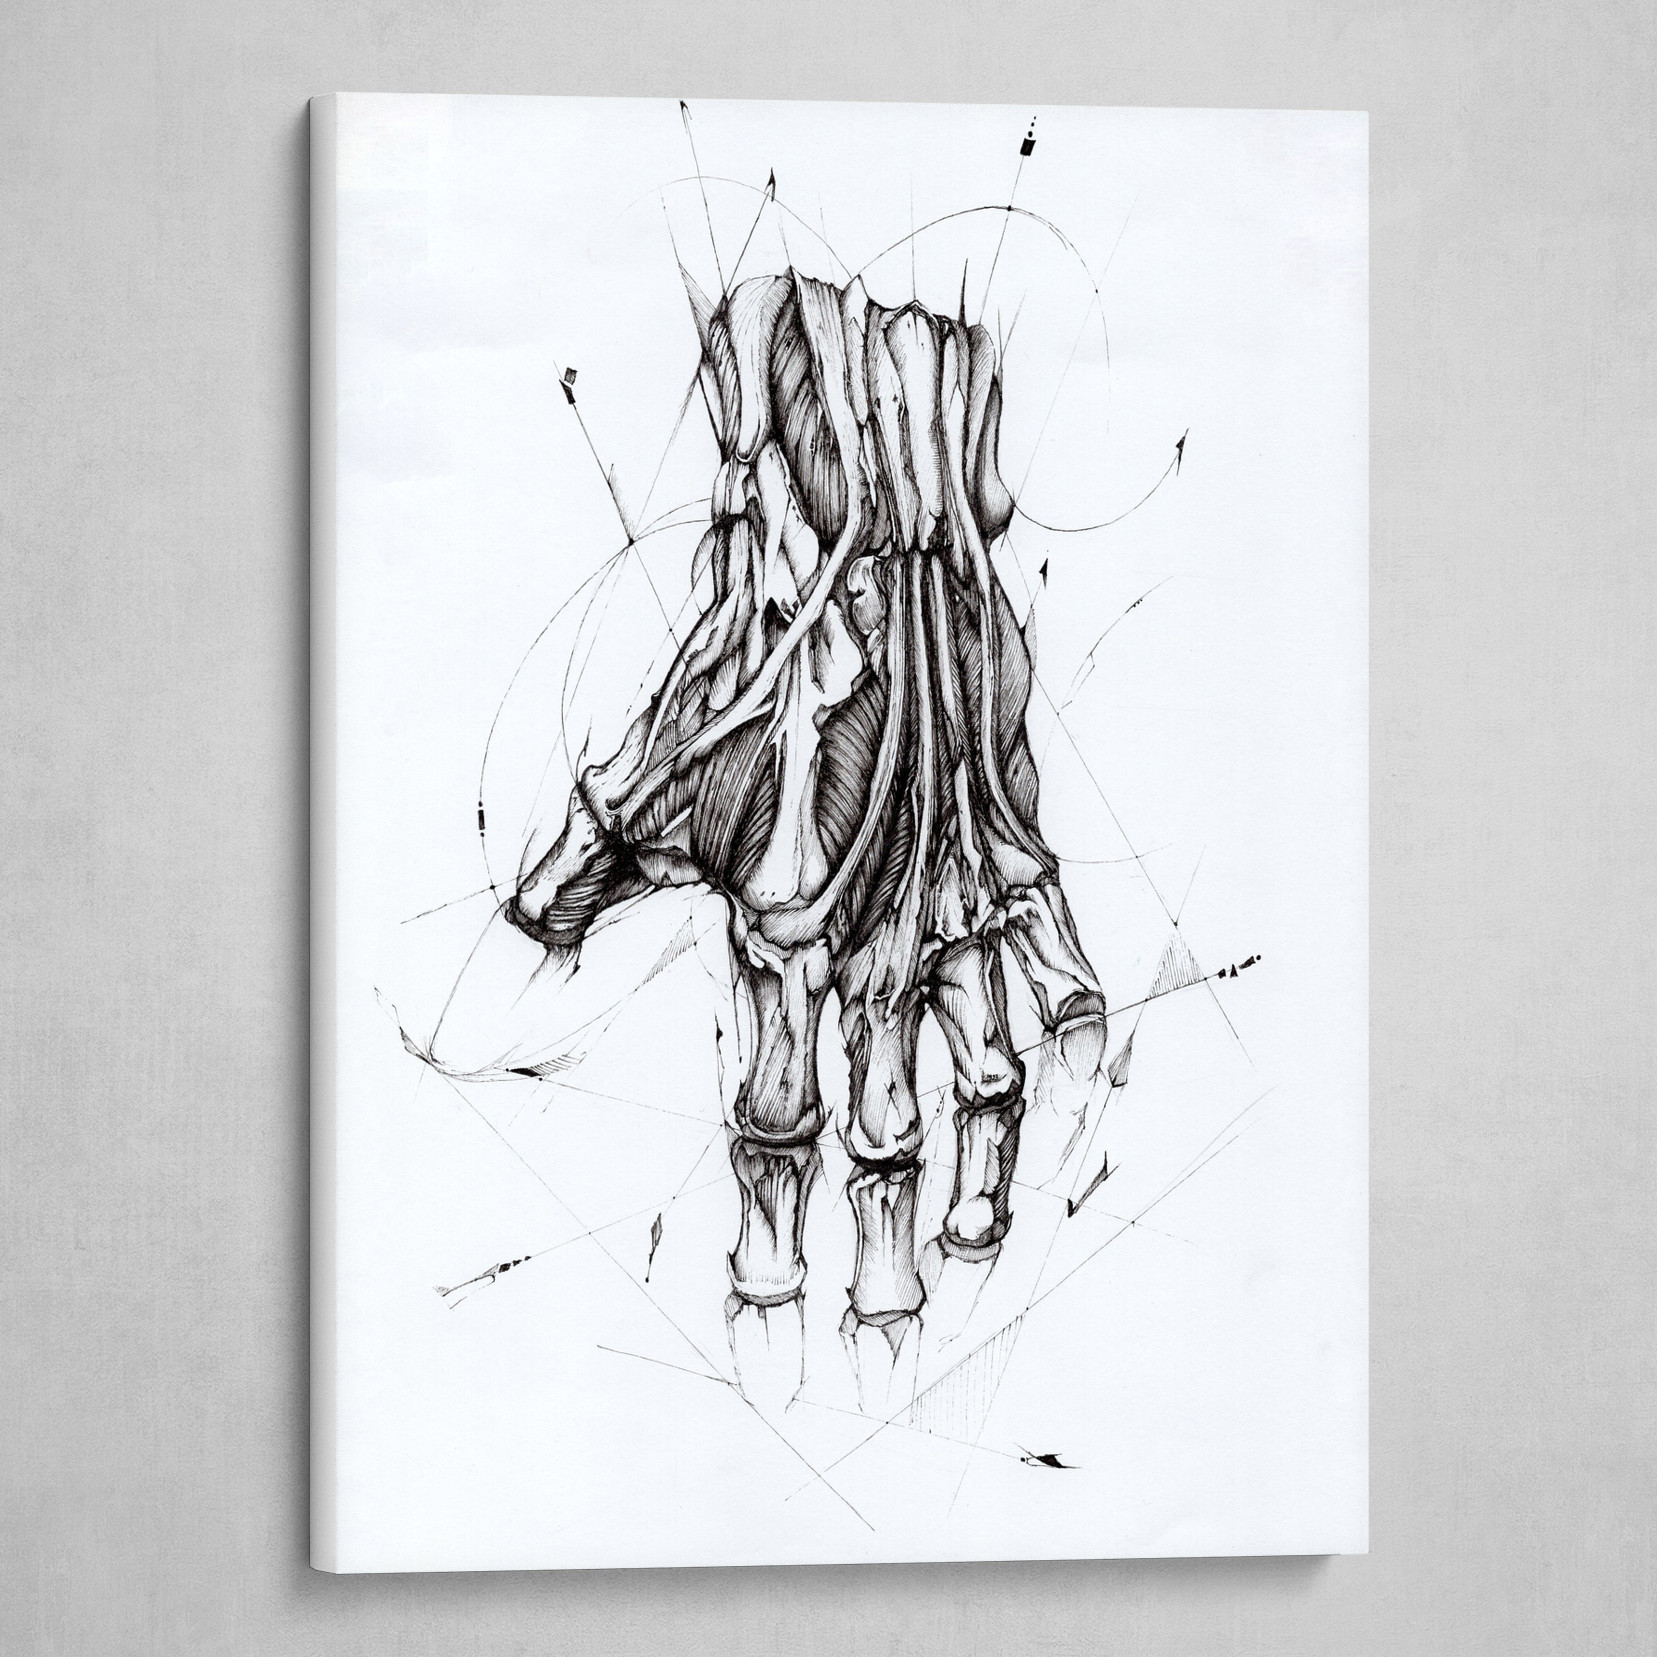 Hand Drawings & Sketches: Canvas Art Prints